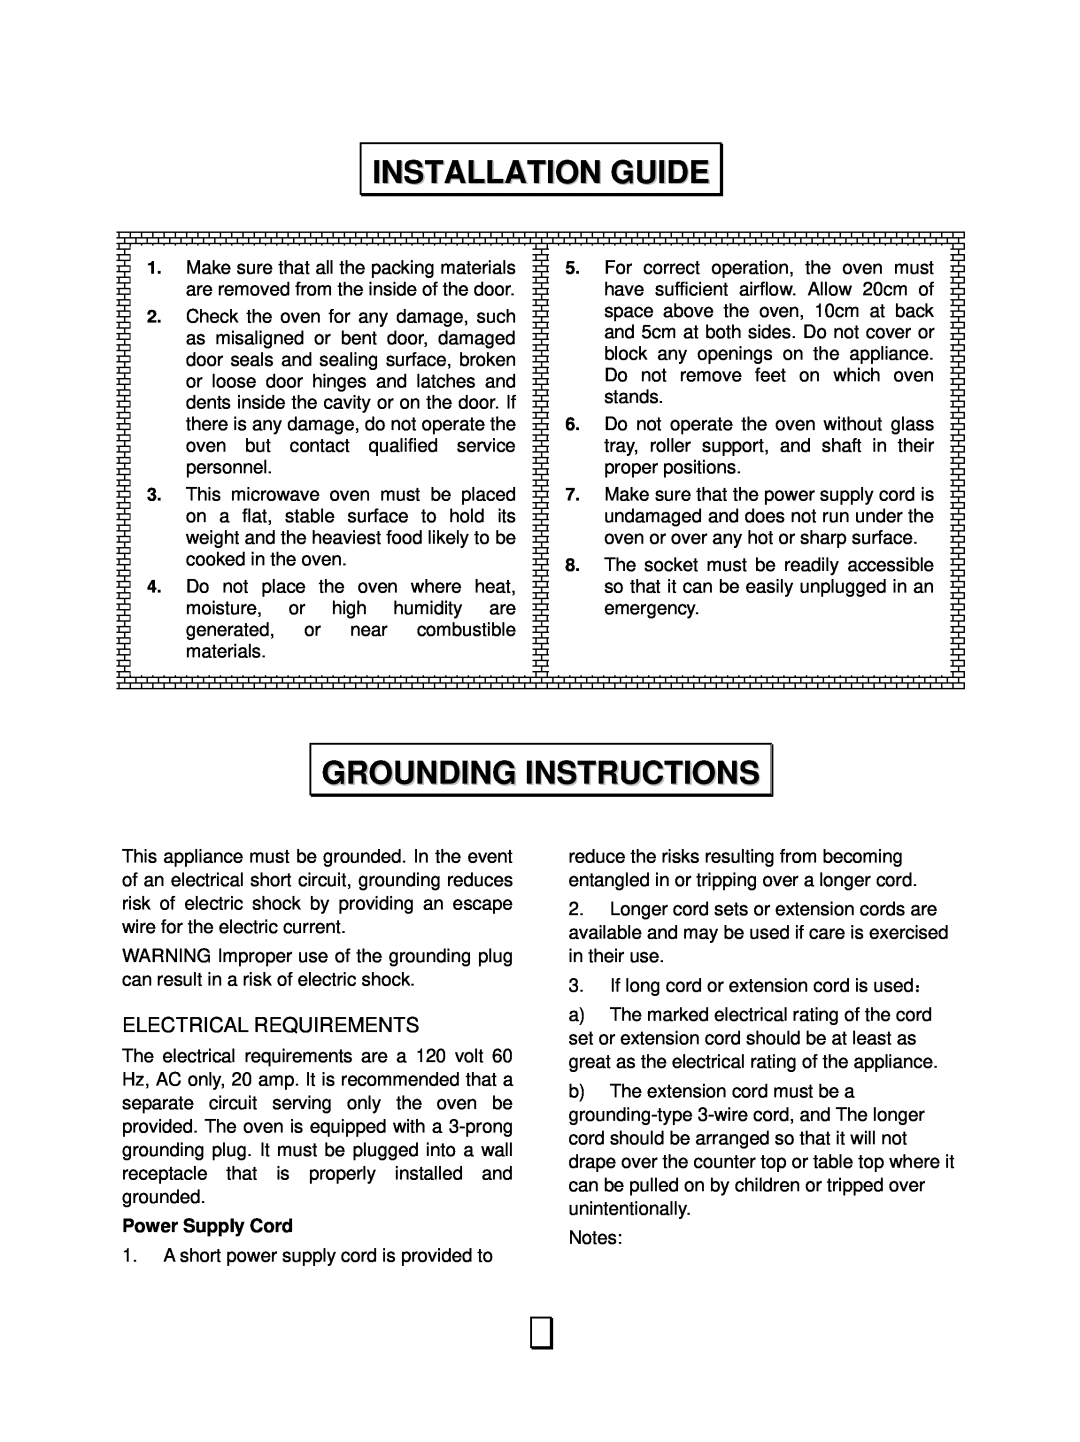 RCA RMW1138 owner manual Installation Guide, Grounding Instructions, Electrical Requirements 